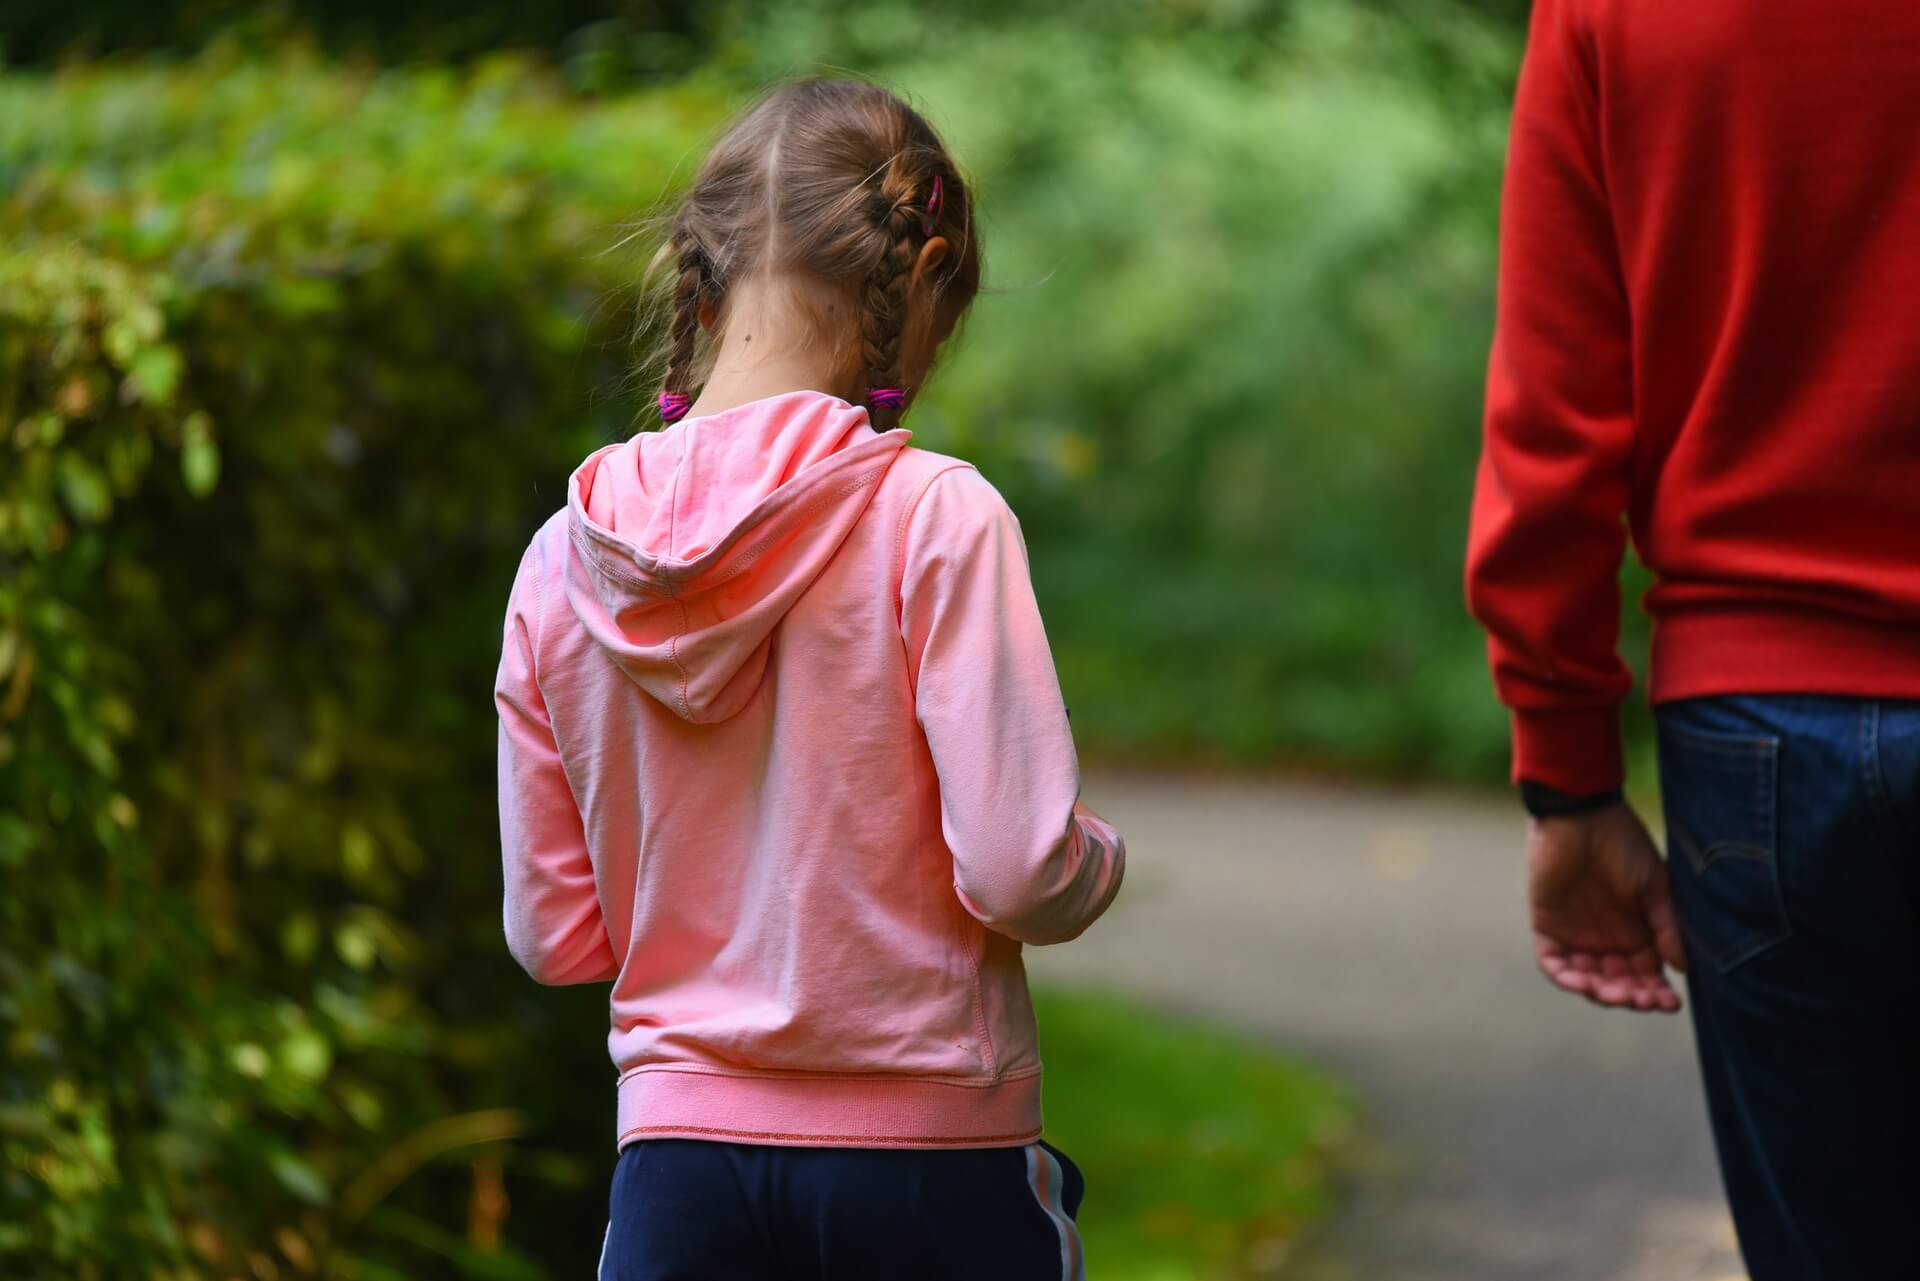 How to support bereaved children and young people